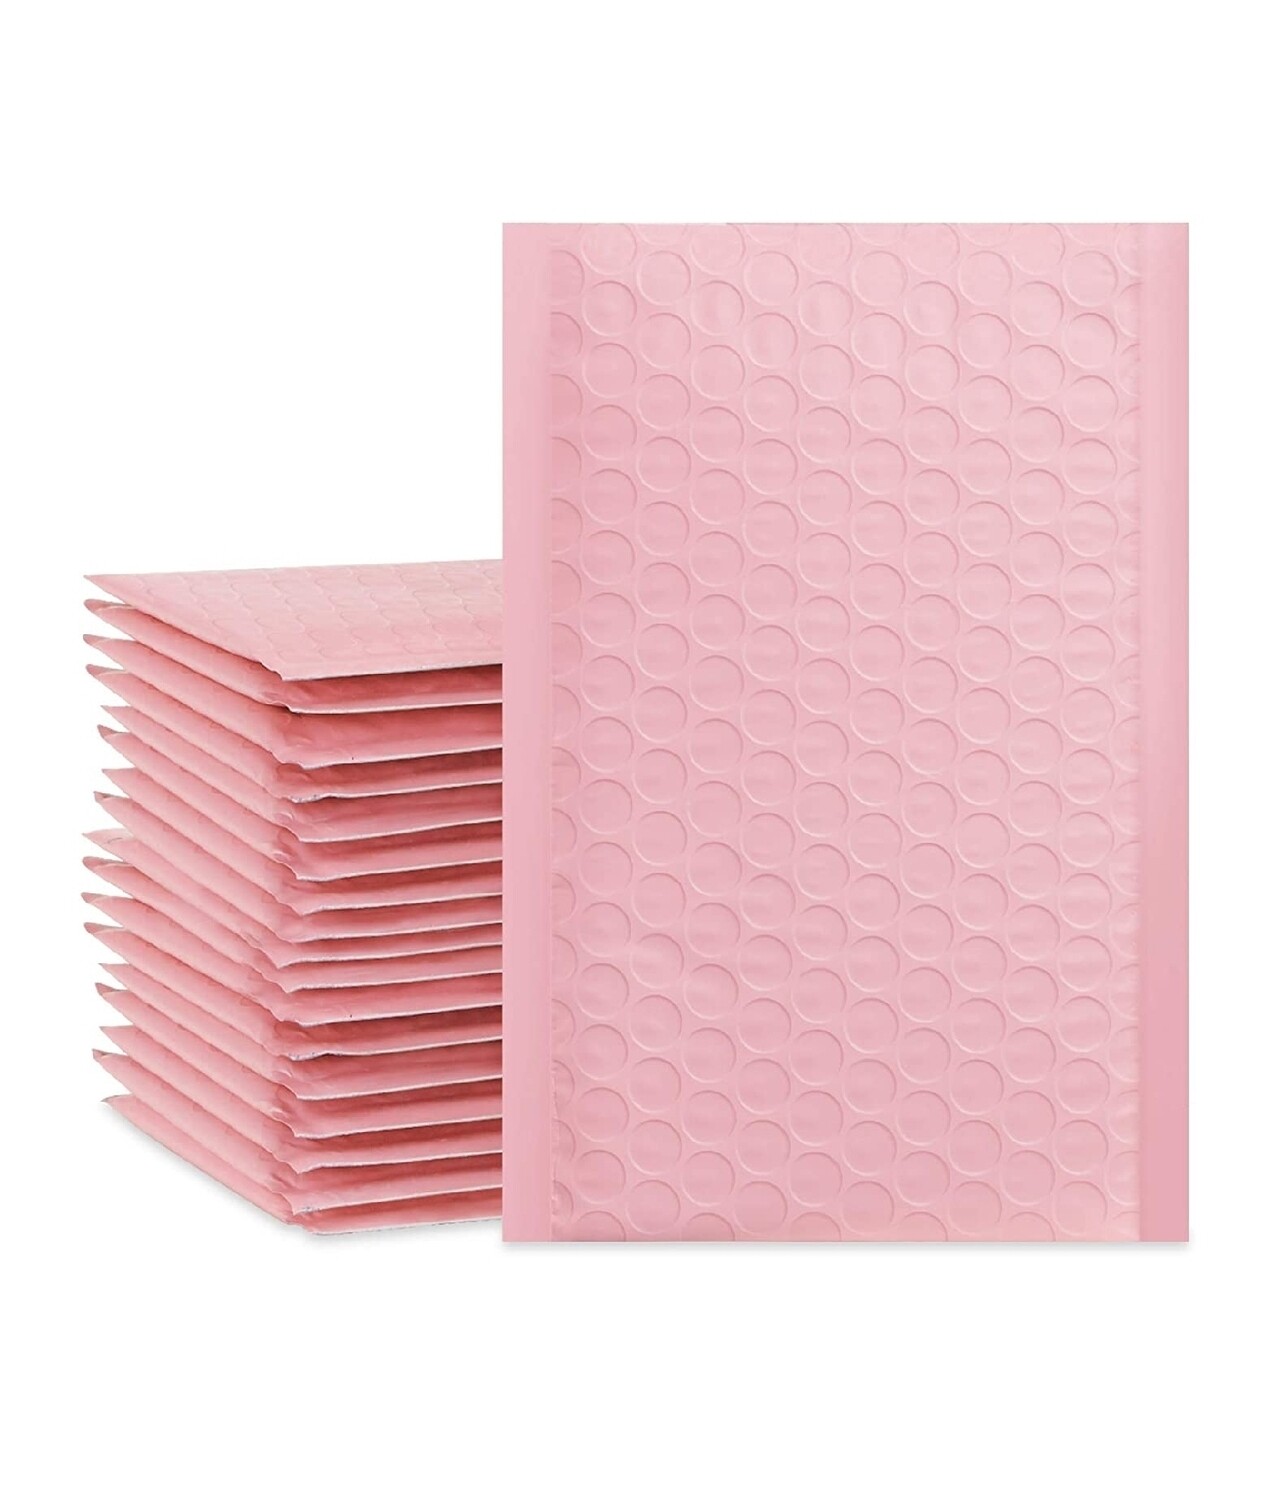 4x8 Inch light pink Poly Bubble Mailers Padded Envelopes